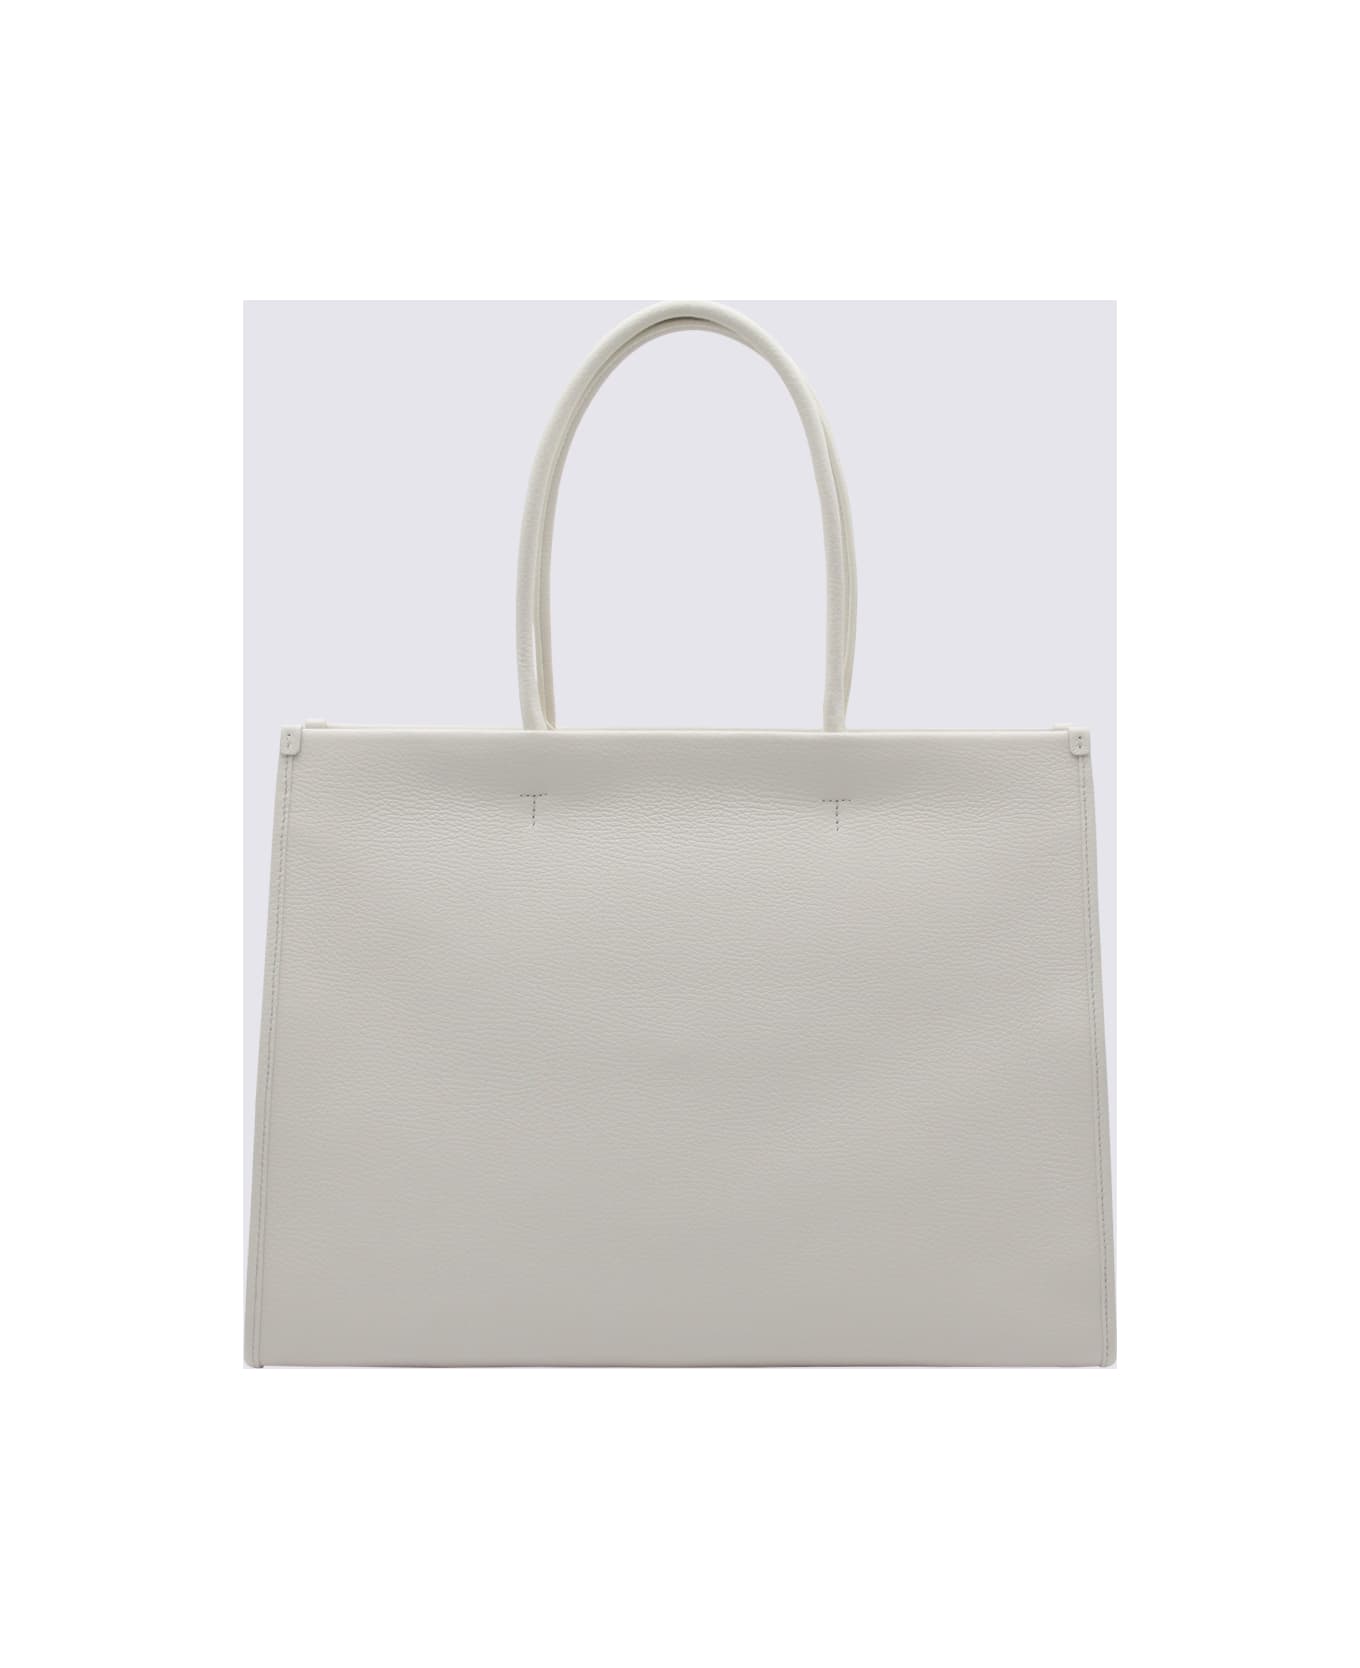 Furla Marshmallow Leather Opportunity Tote Bag - White/Black トートバッグ